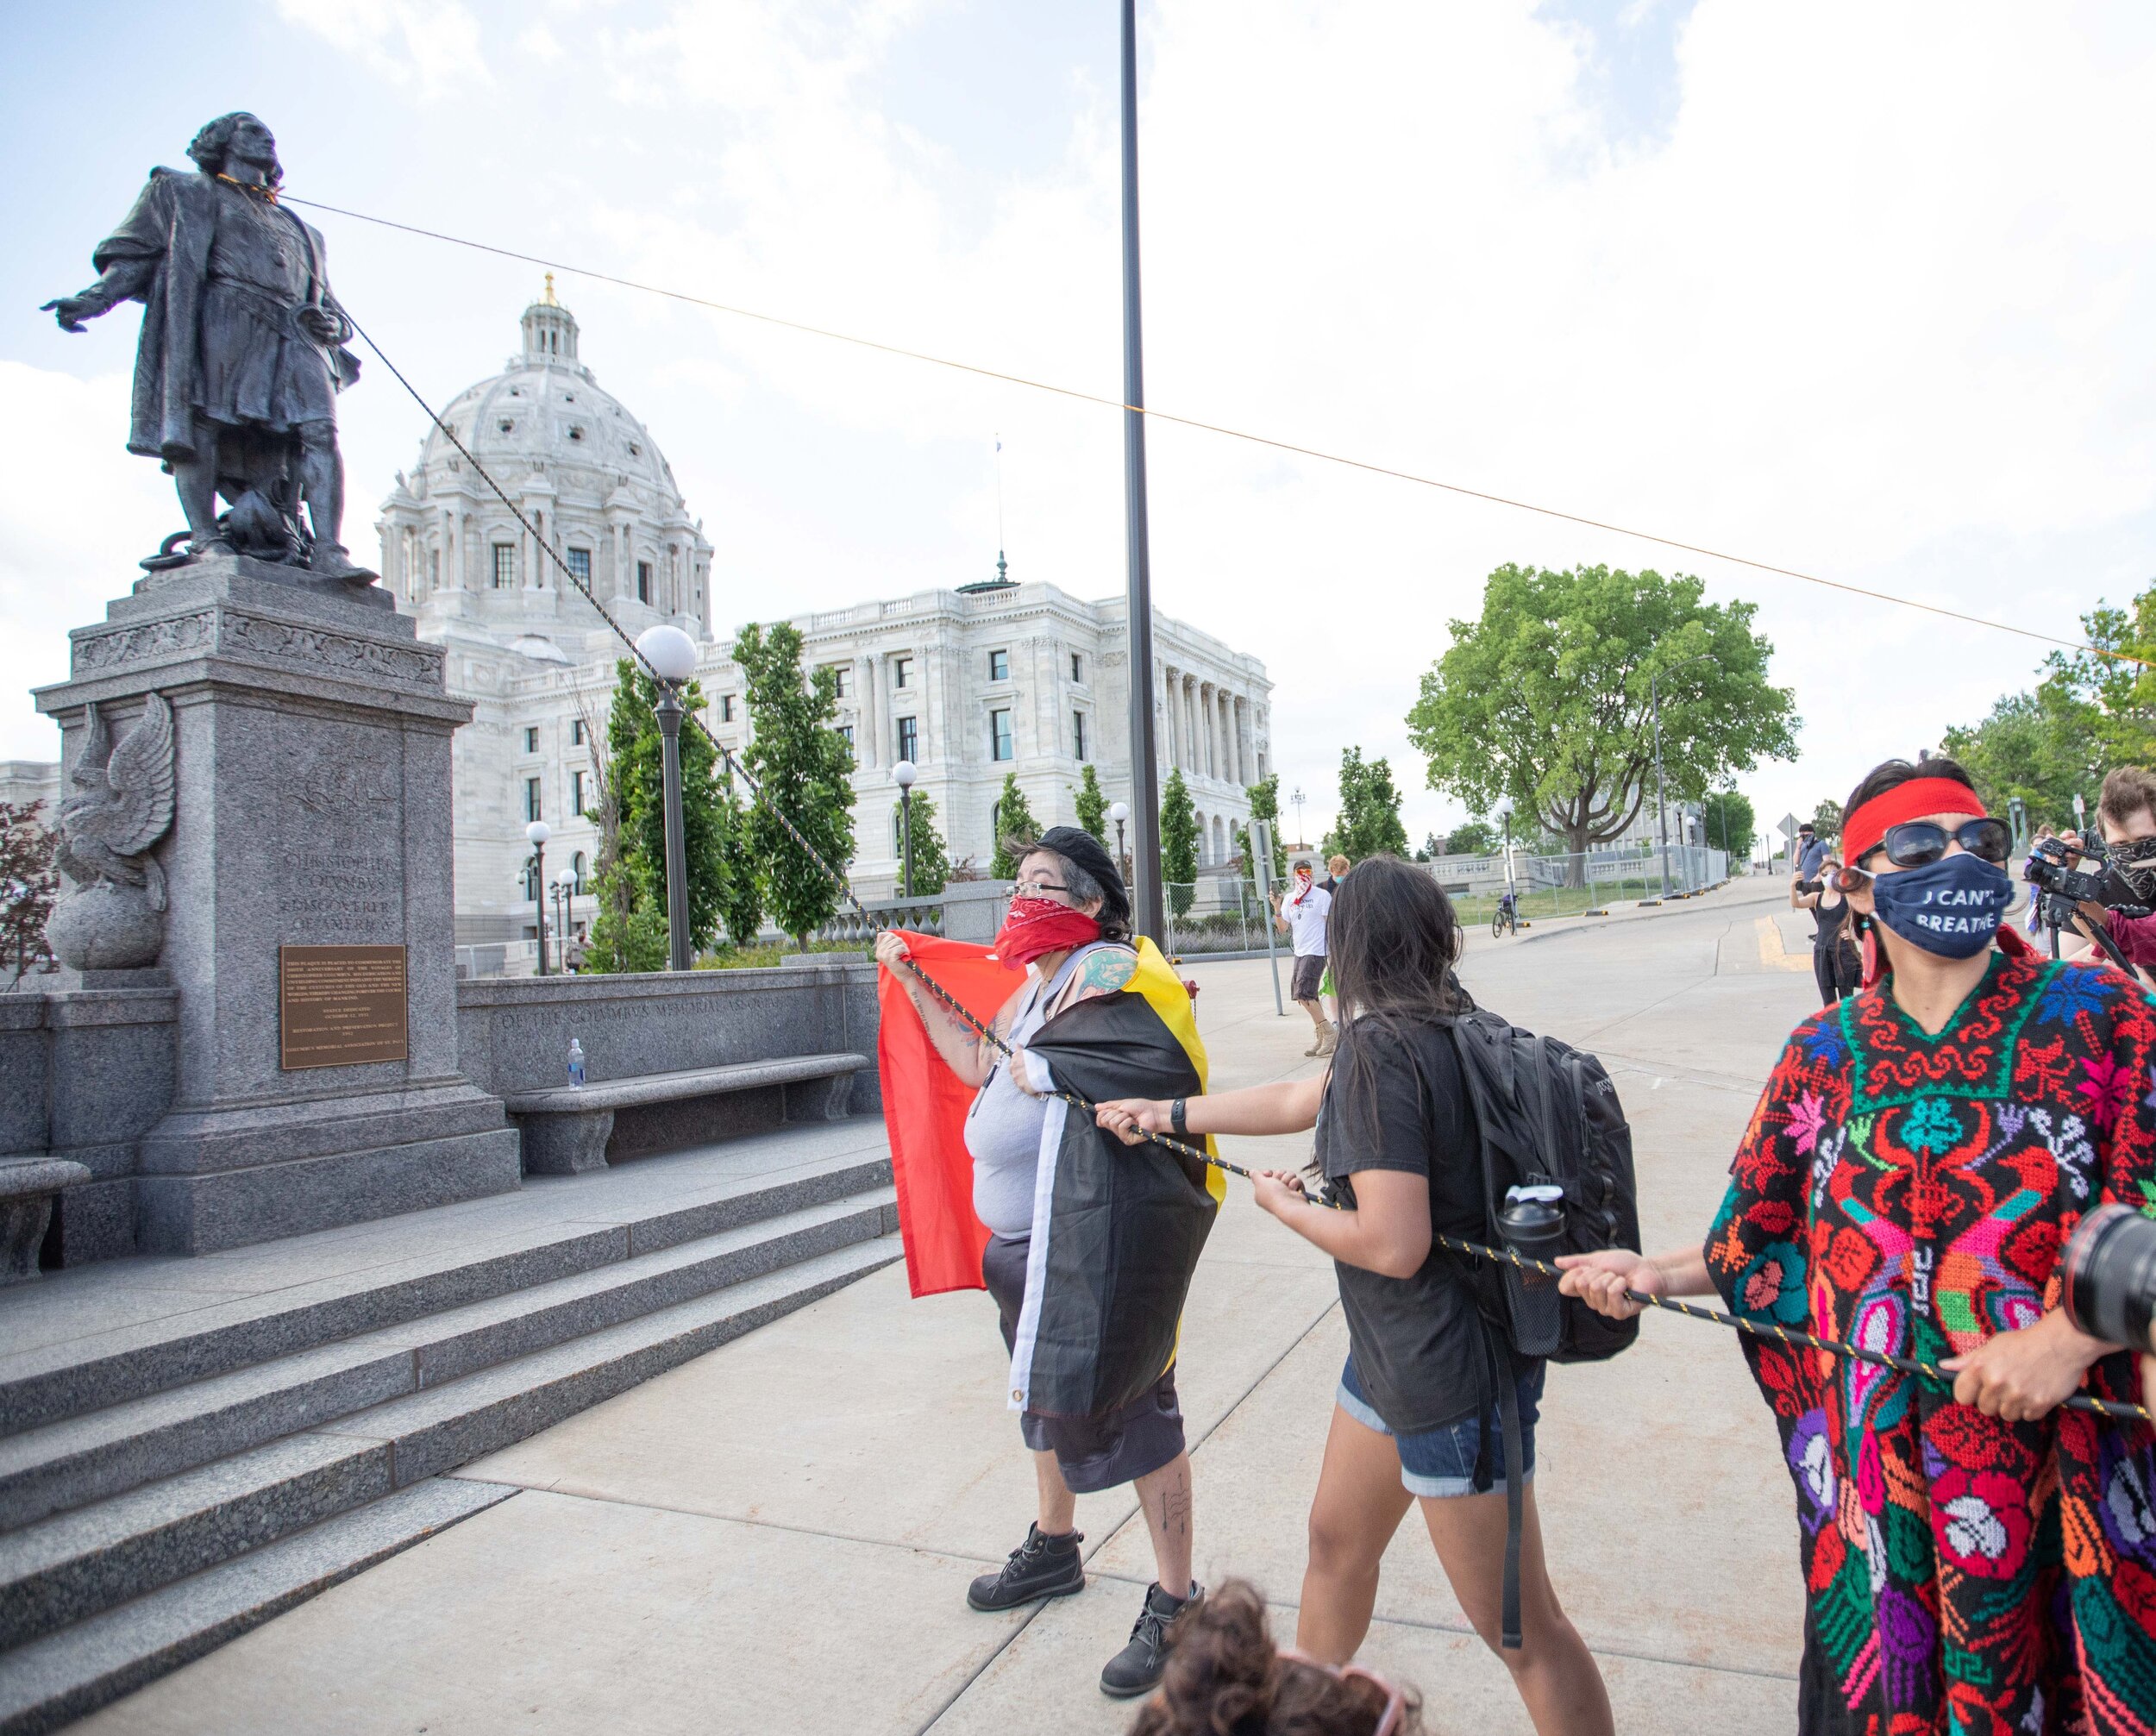  Native American women form 2 lines to rip down the Christopher Columbus statue on the grounds of the State Capitol in Saint Paul, Minnesota on Jan 10, 2020. 